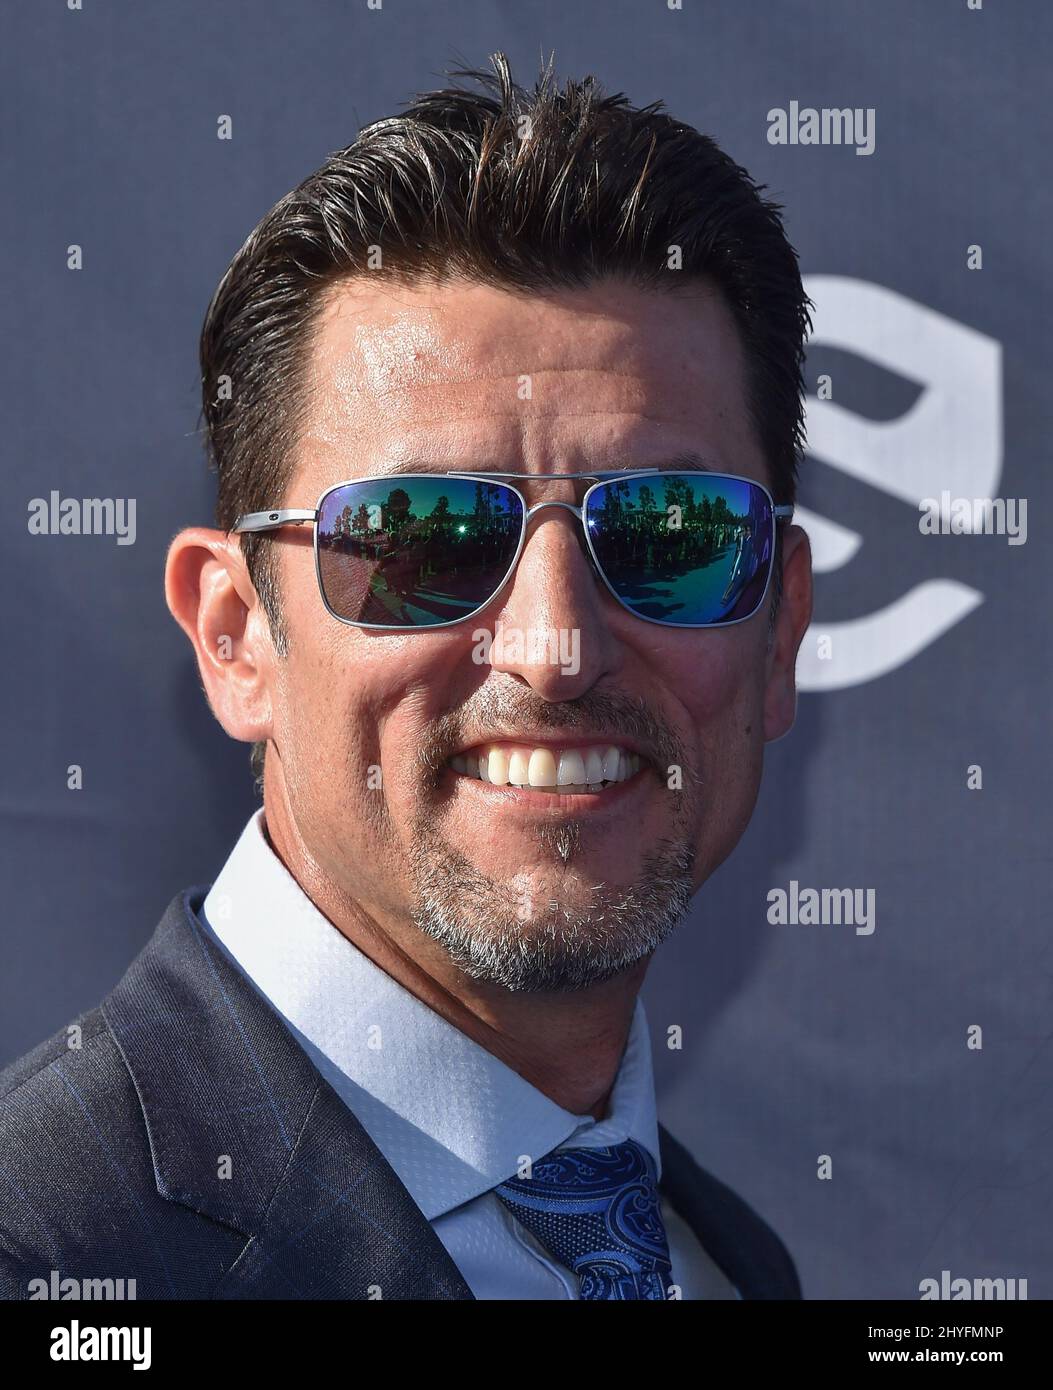 Nomar Garciaparra attending the 4th Annual Blue Diamond Gala event at Dodger Stadium on June 11, 2018 in Los Angeles, CA Stock Photo